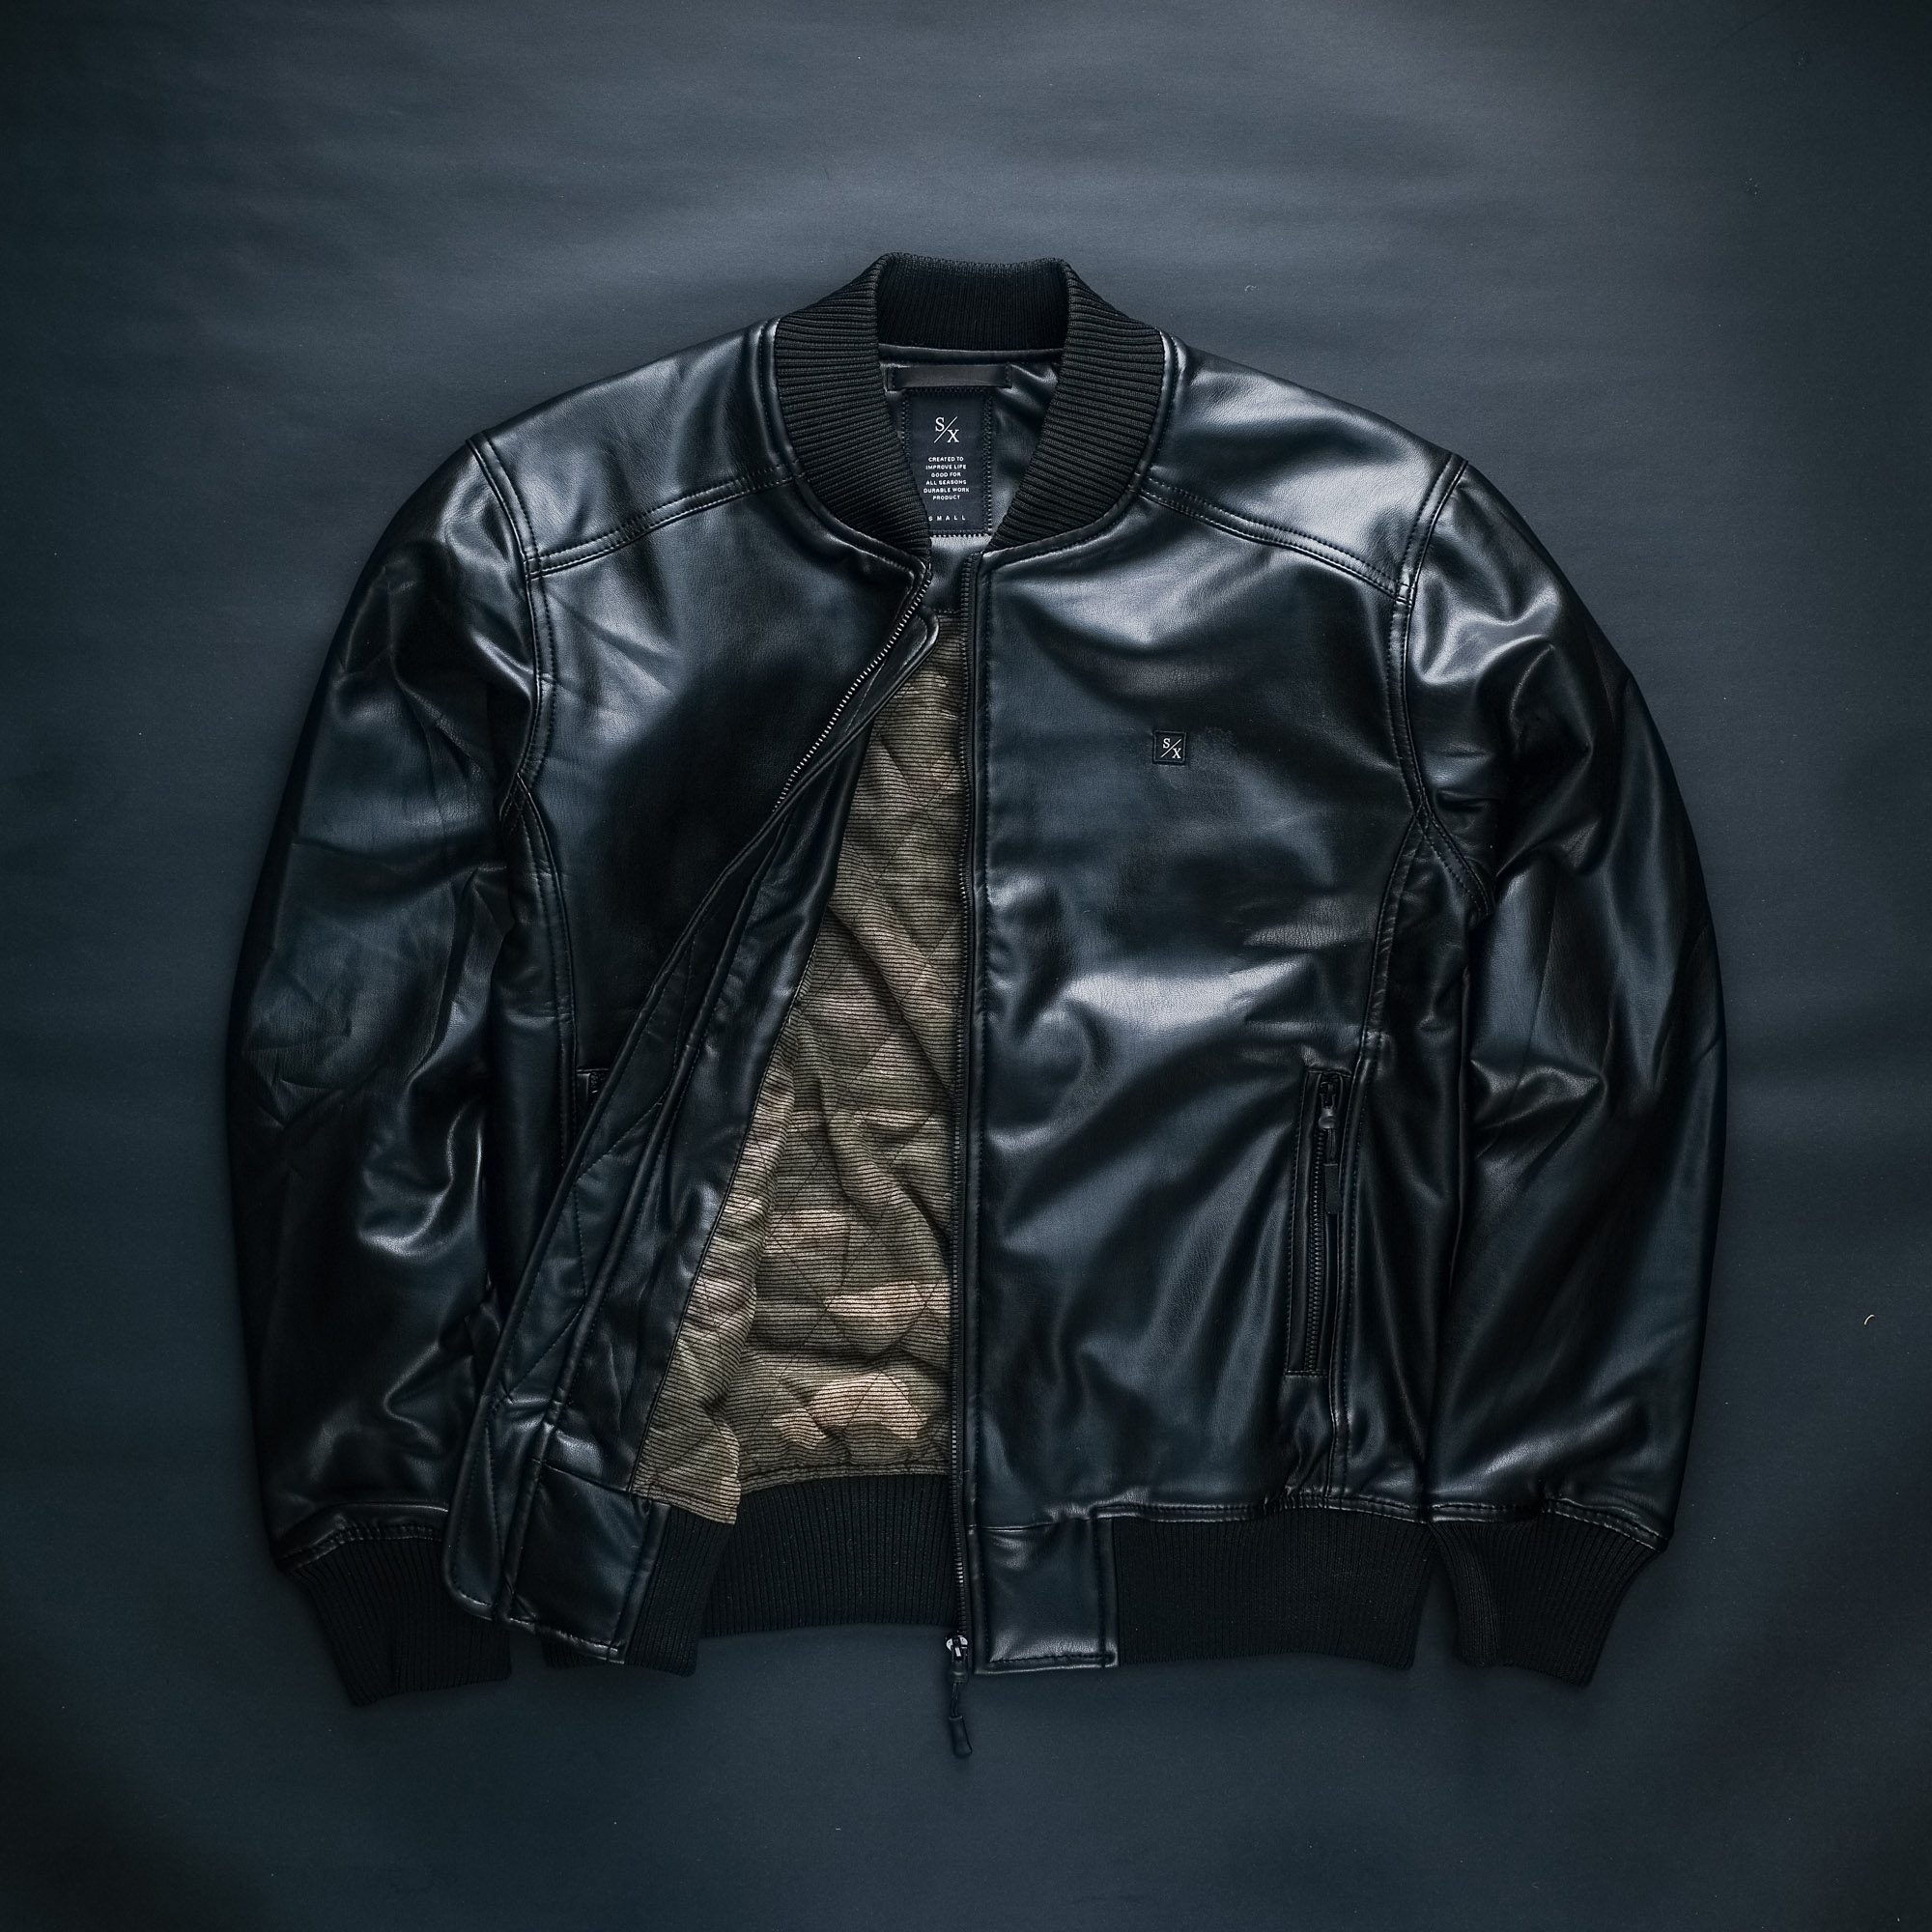 Undercover Bomber Black “SPECIAL MATERIAL” – SIXPAX